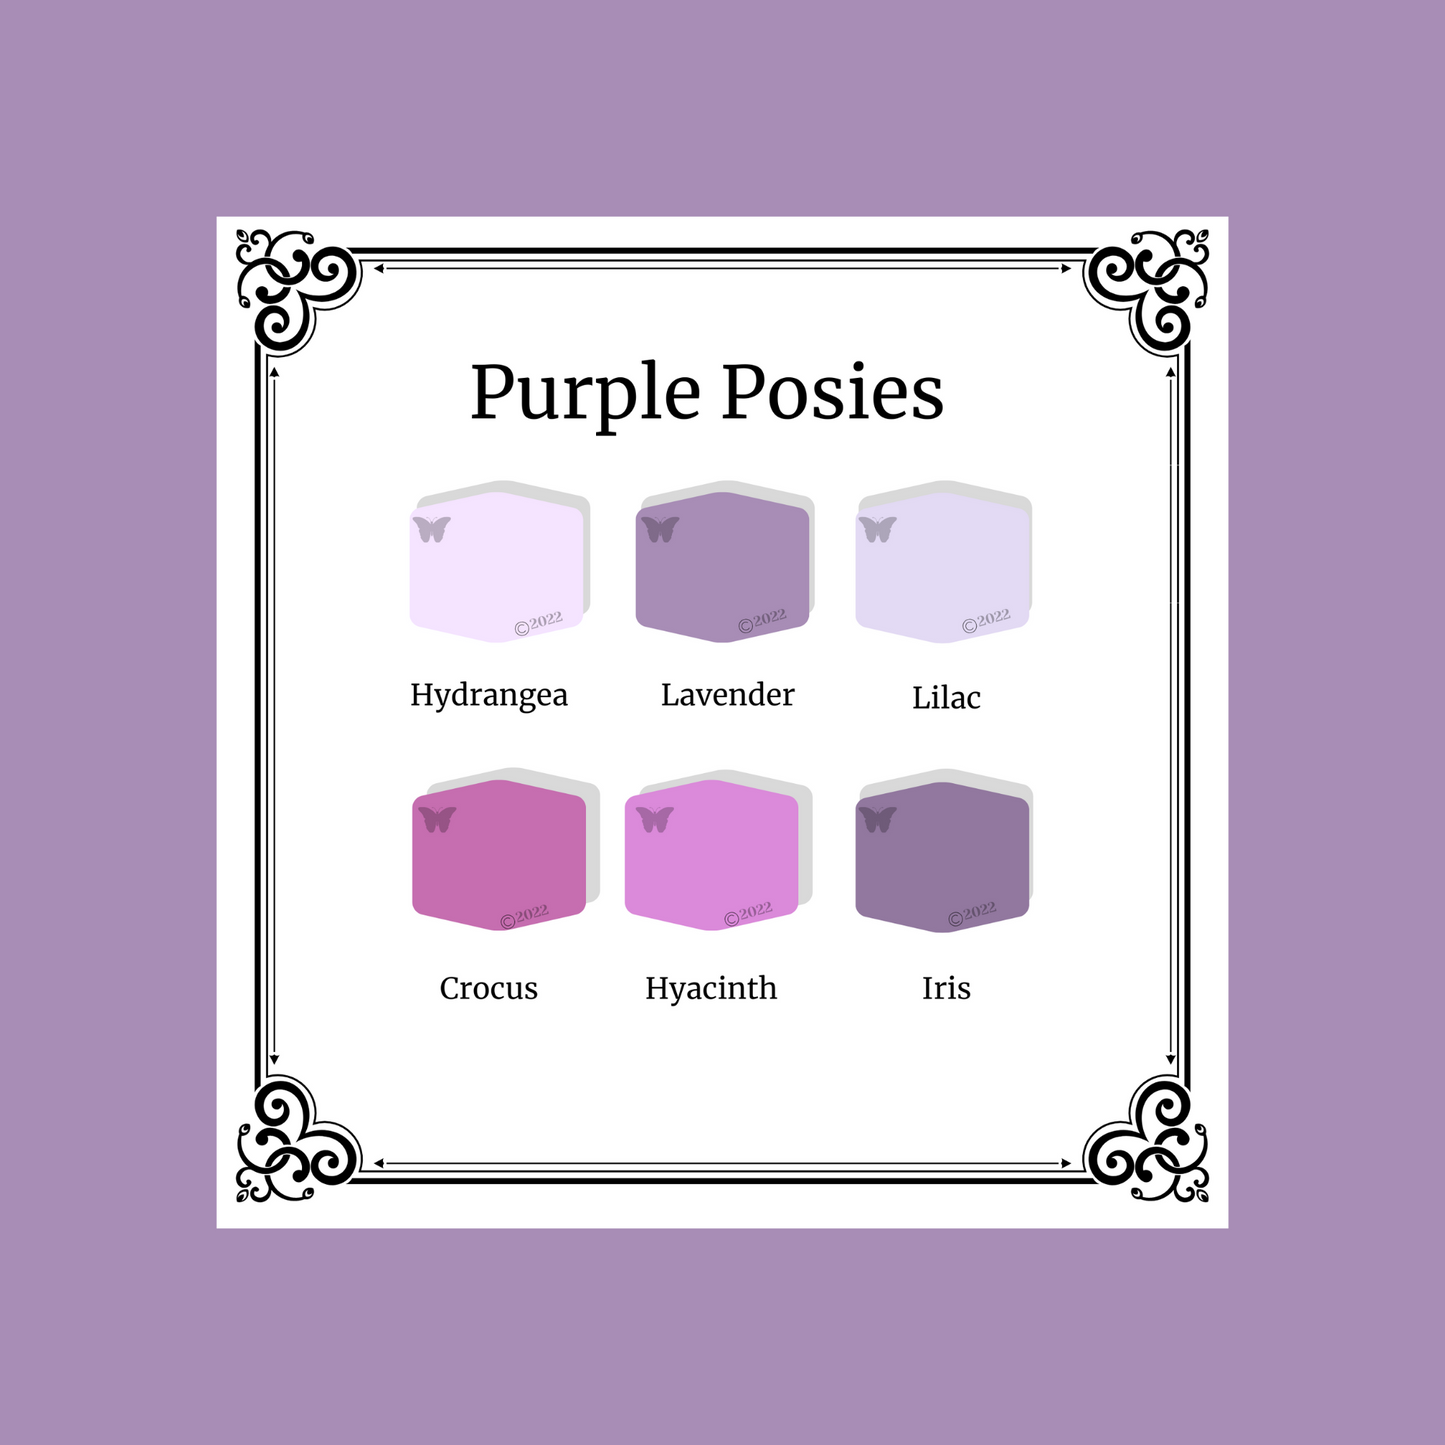 Purple Posies Polymer Clay Tutorial - the 6 gorgeous colors! on a lavender background